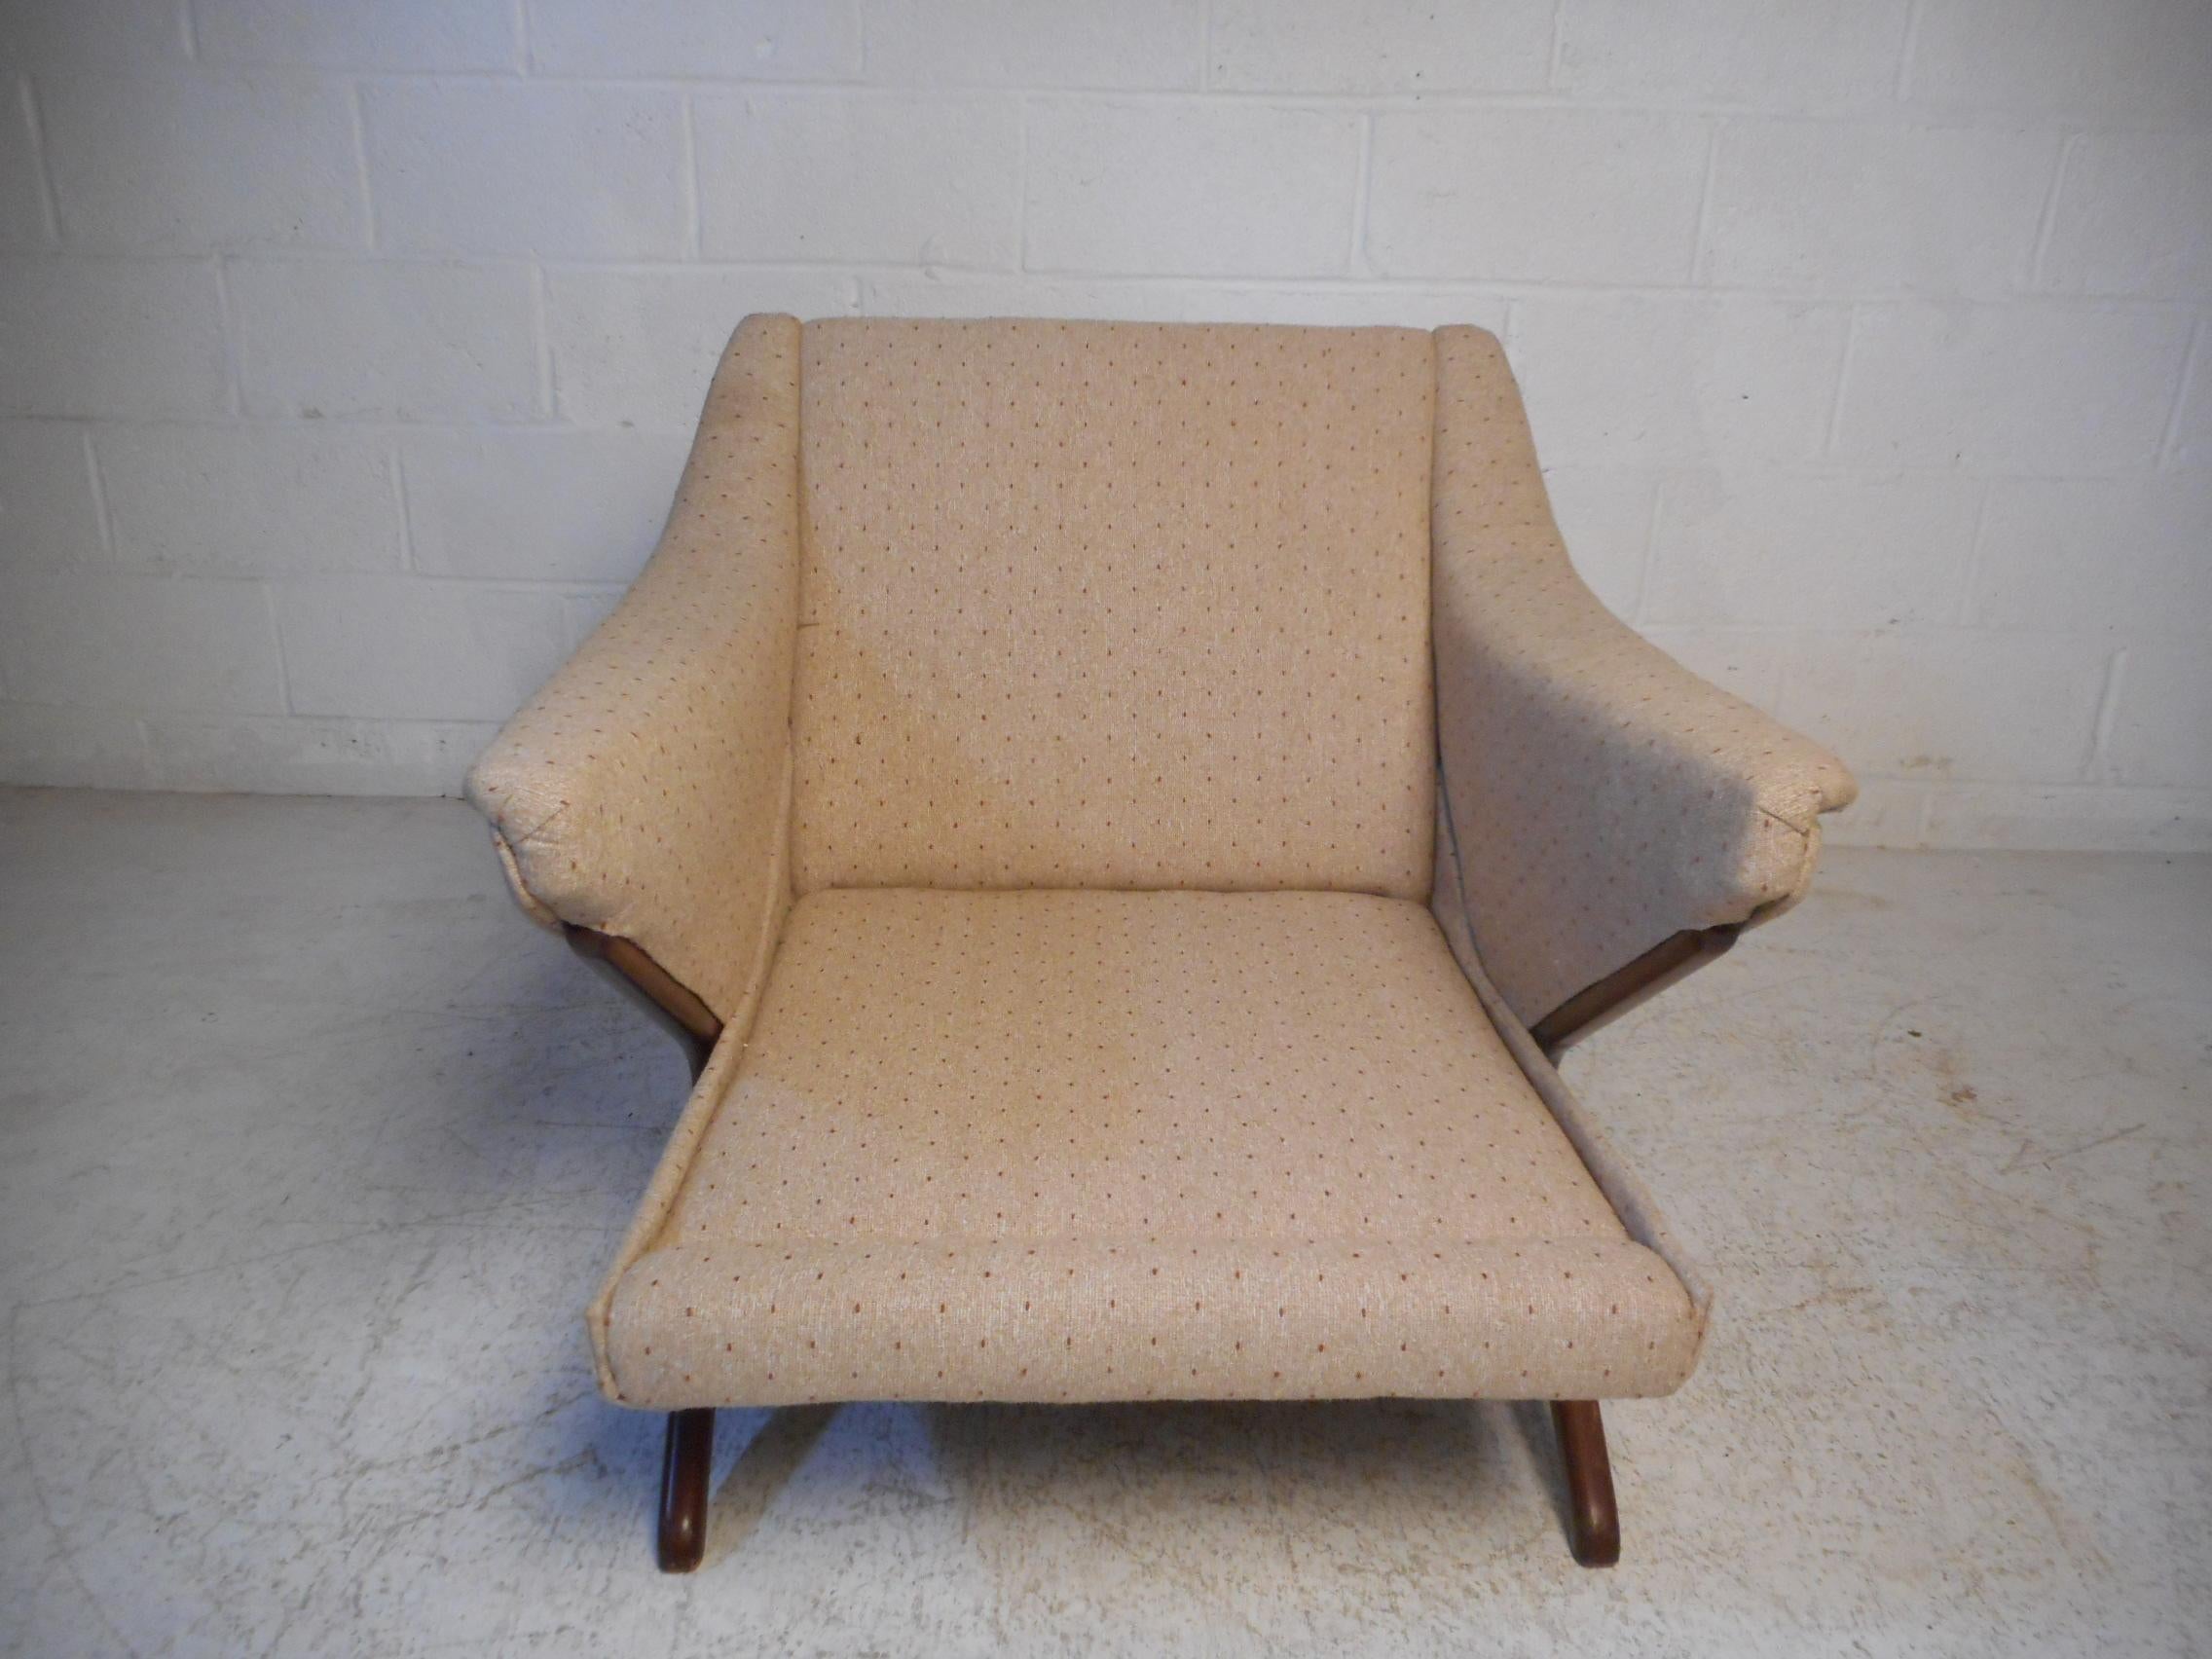 Upholstery Pair of Midcentury Lounge Chairs